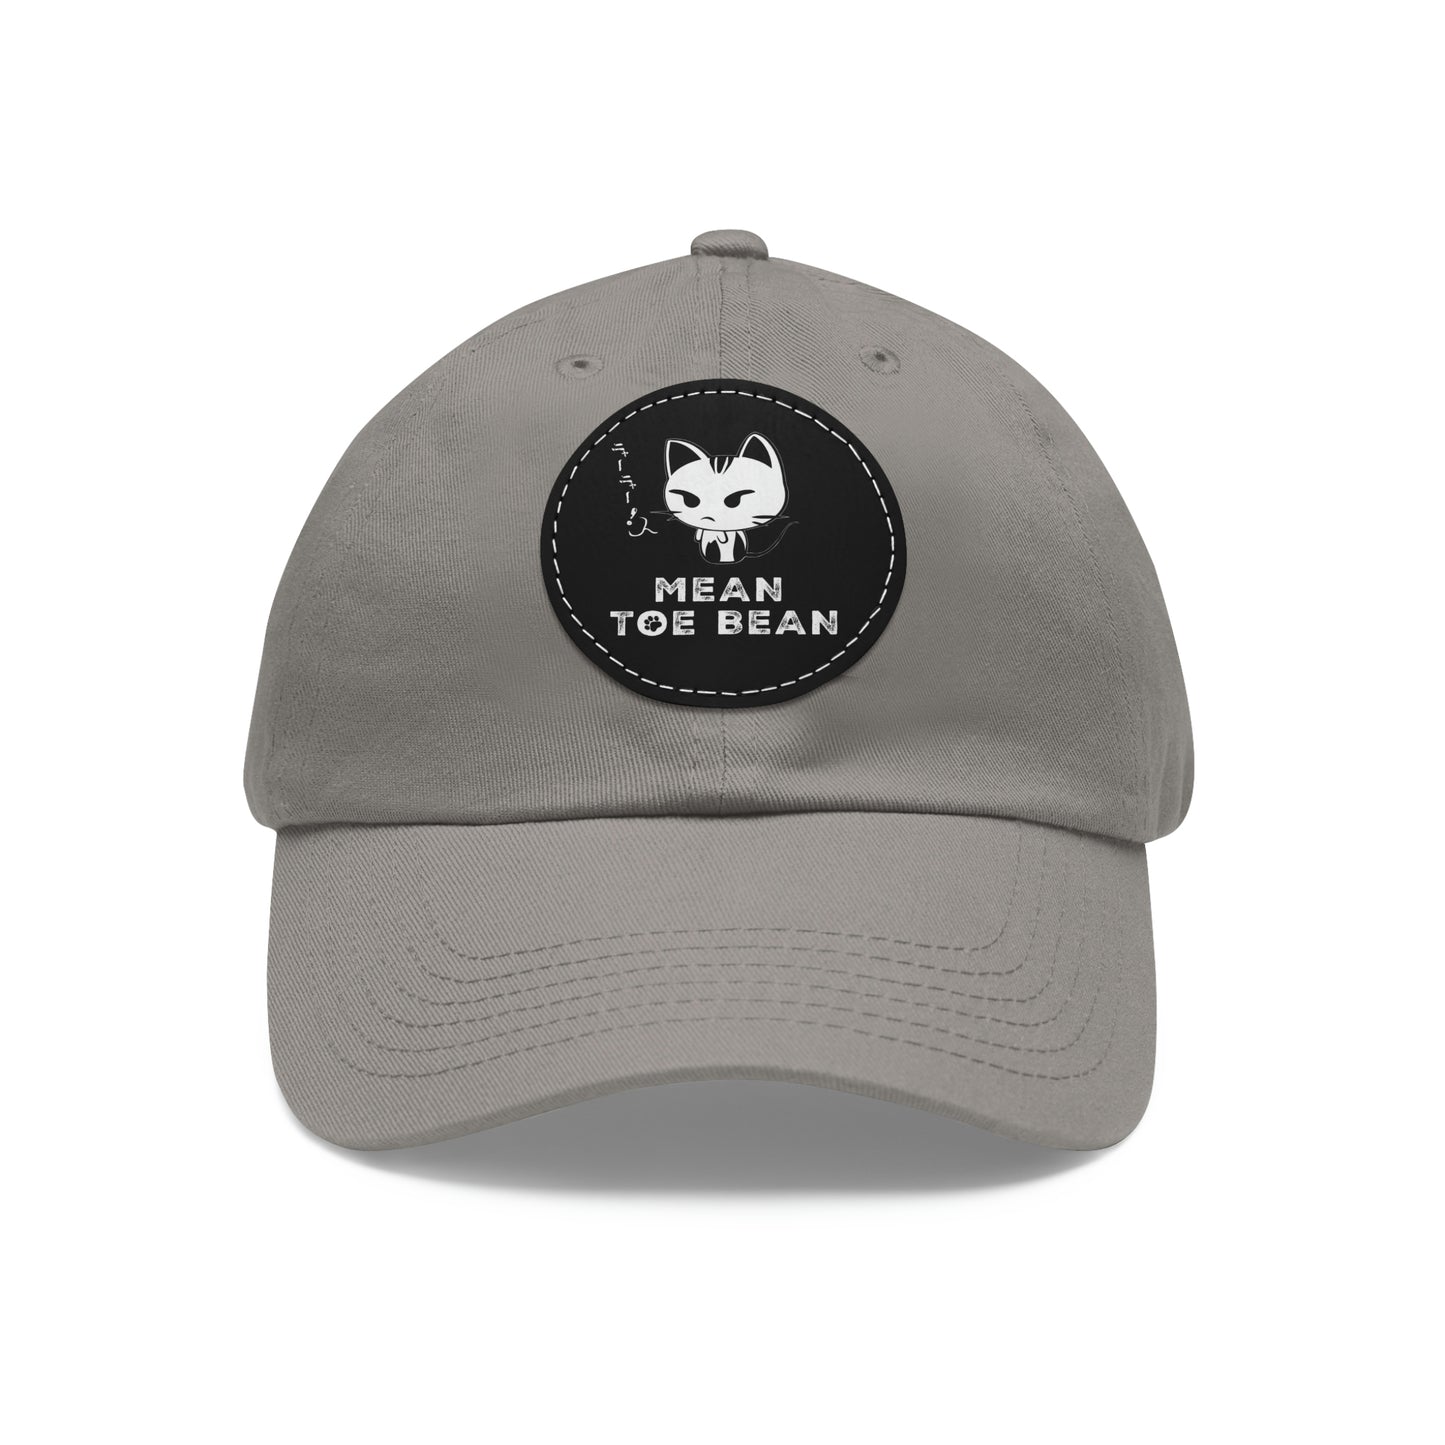 Mean Toe Bean Original Hat with Leather Patch (Round)